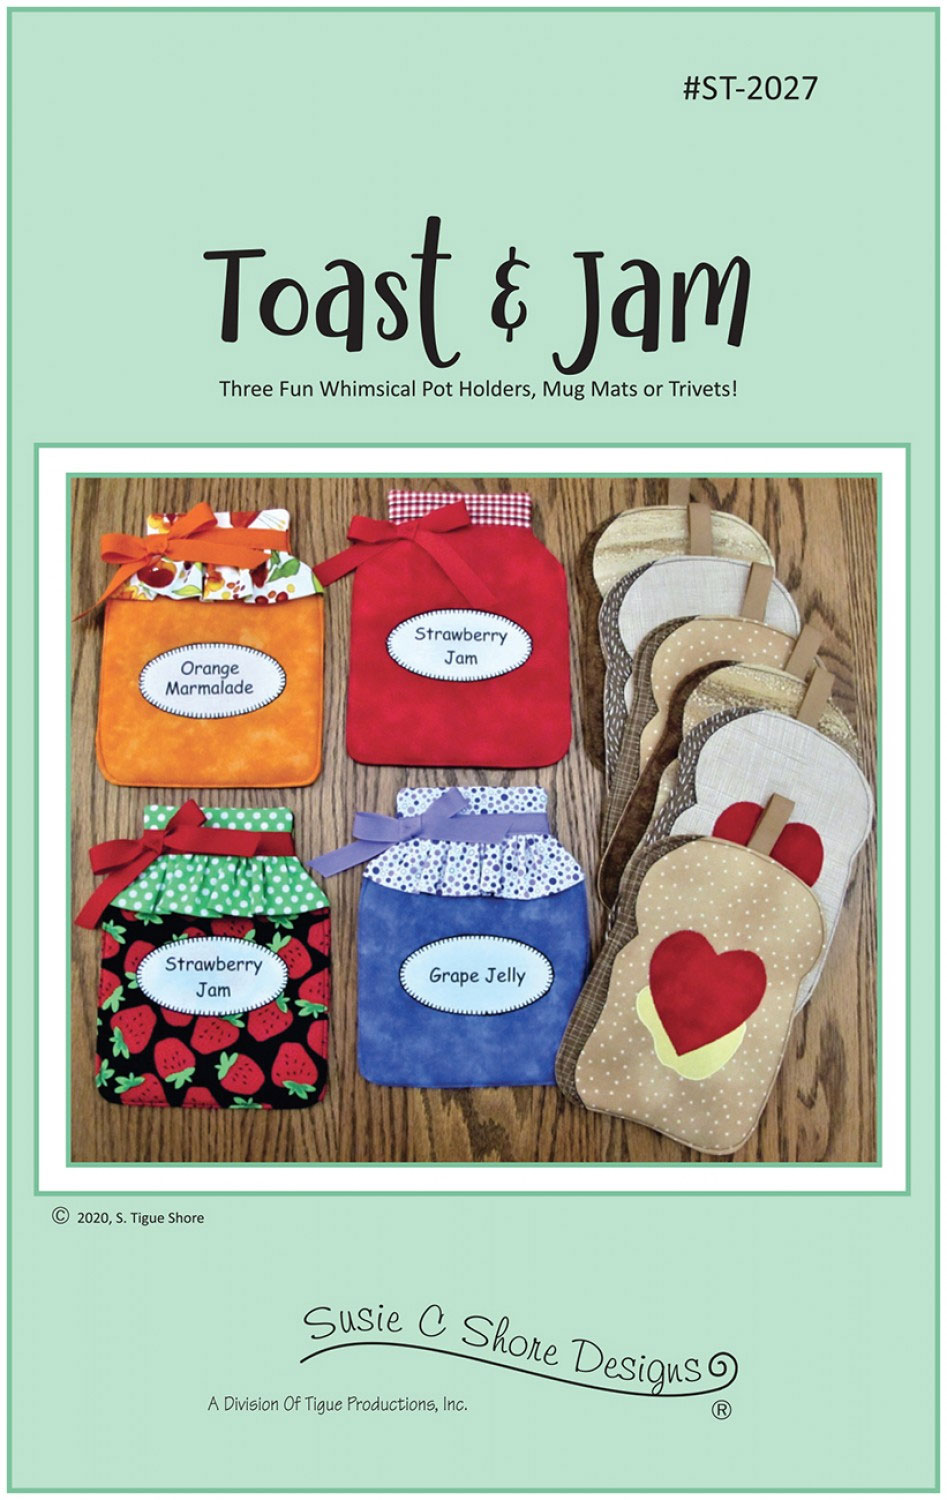 Toast-and-Jam-pot-holders-sewing-pattern-Susie-C-Shore-front